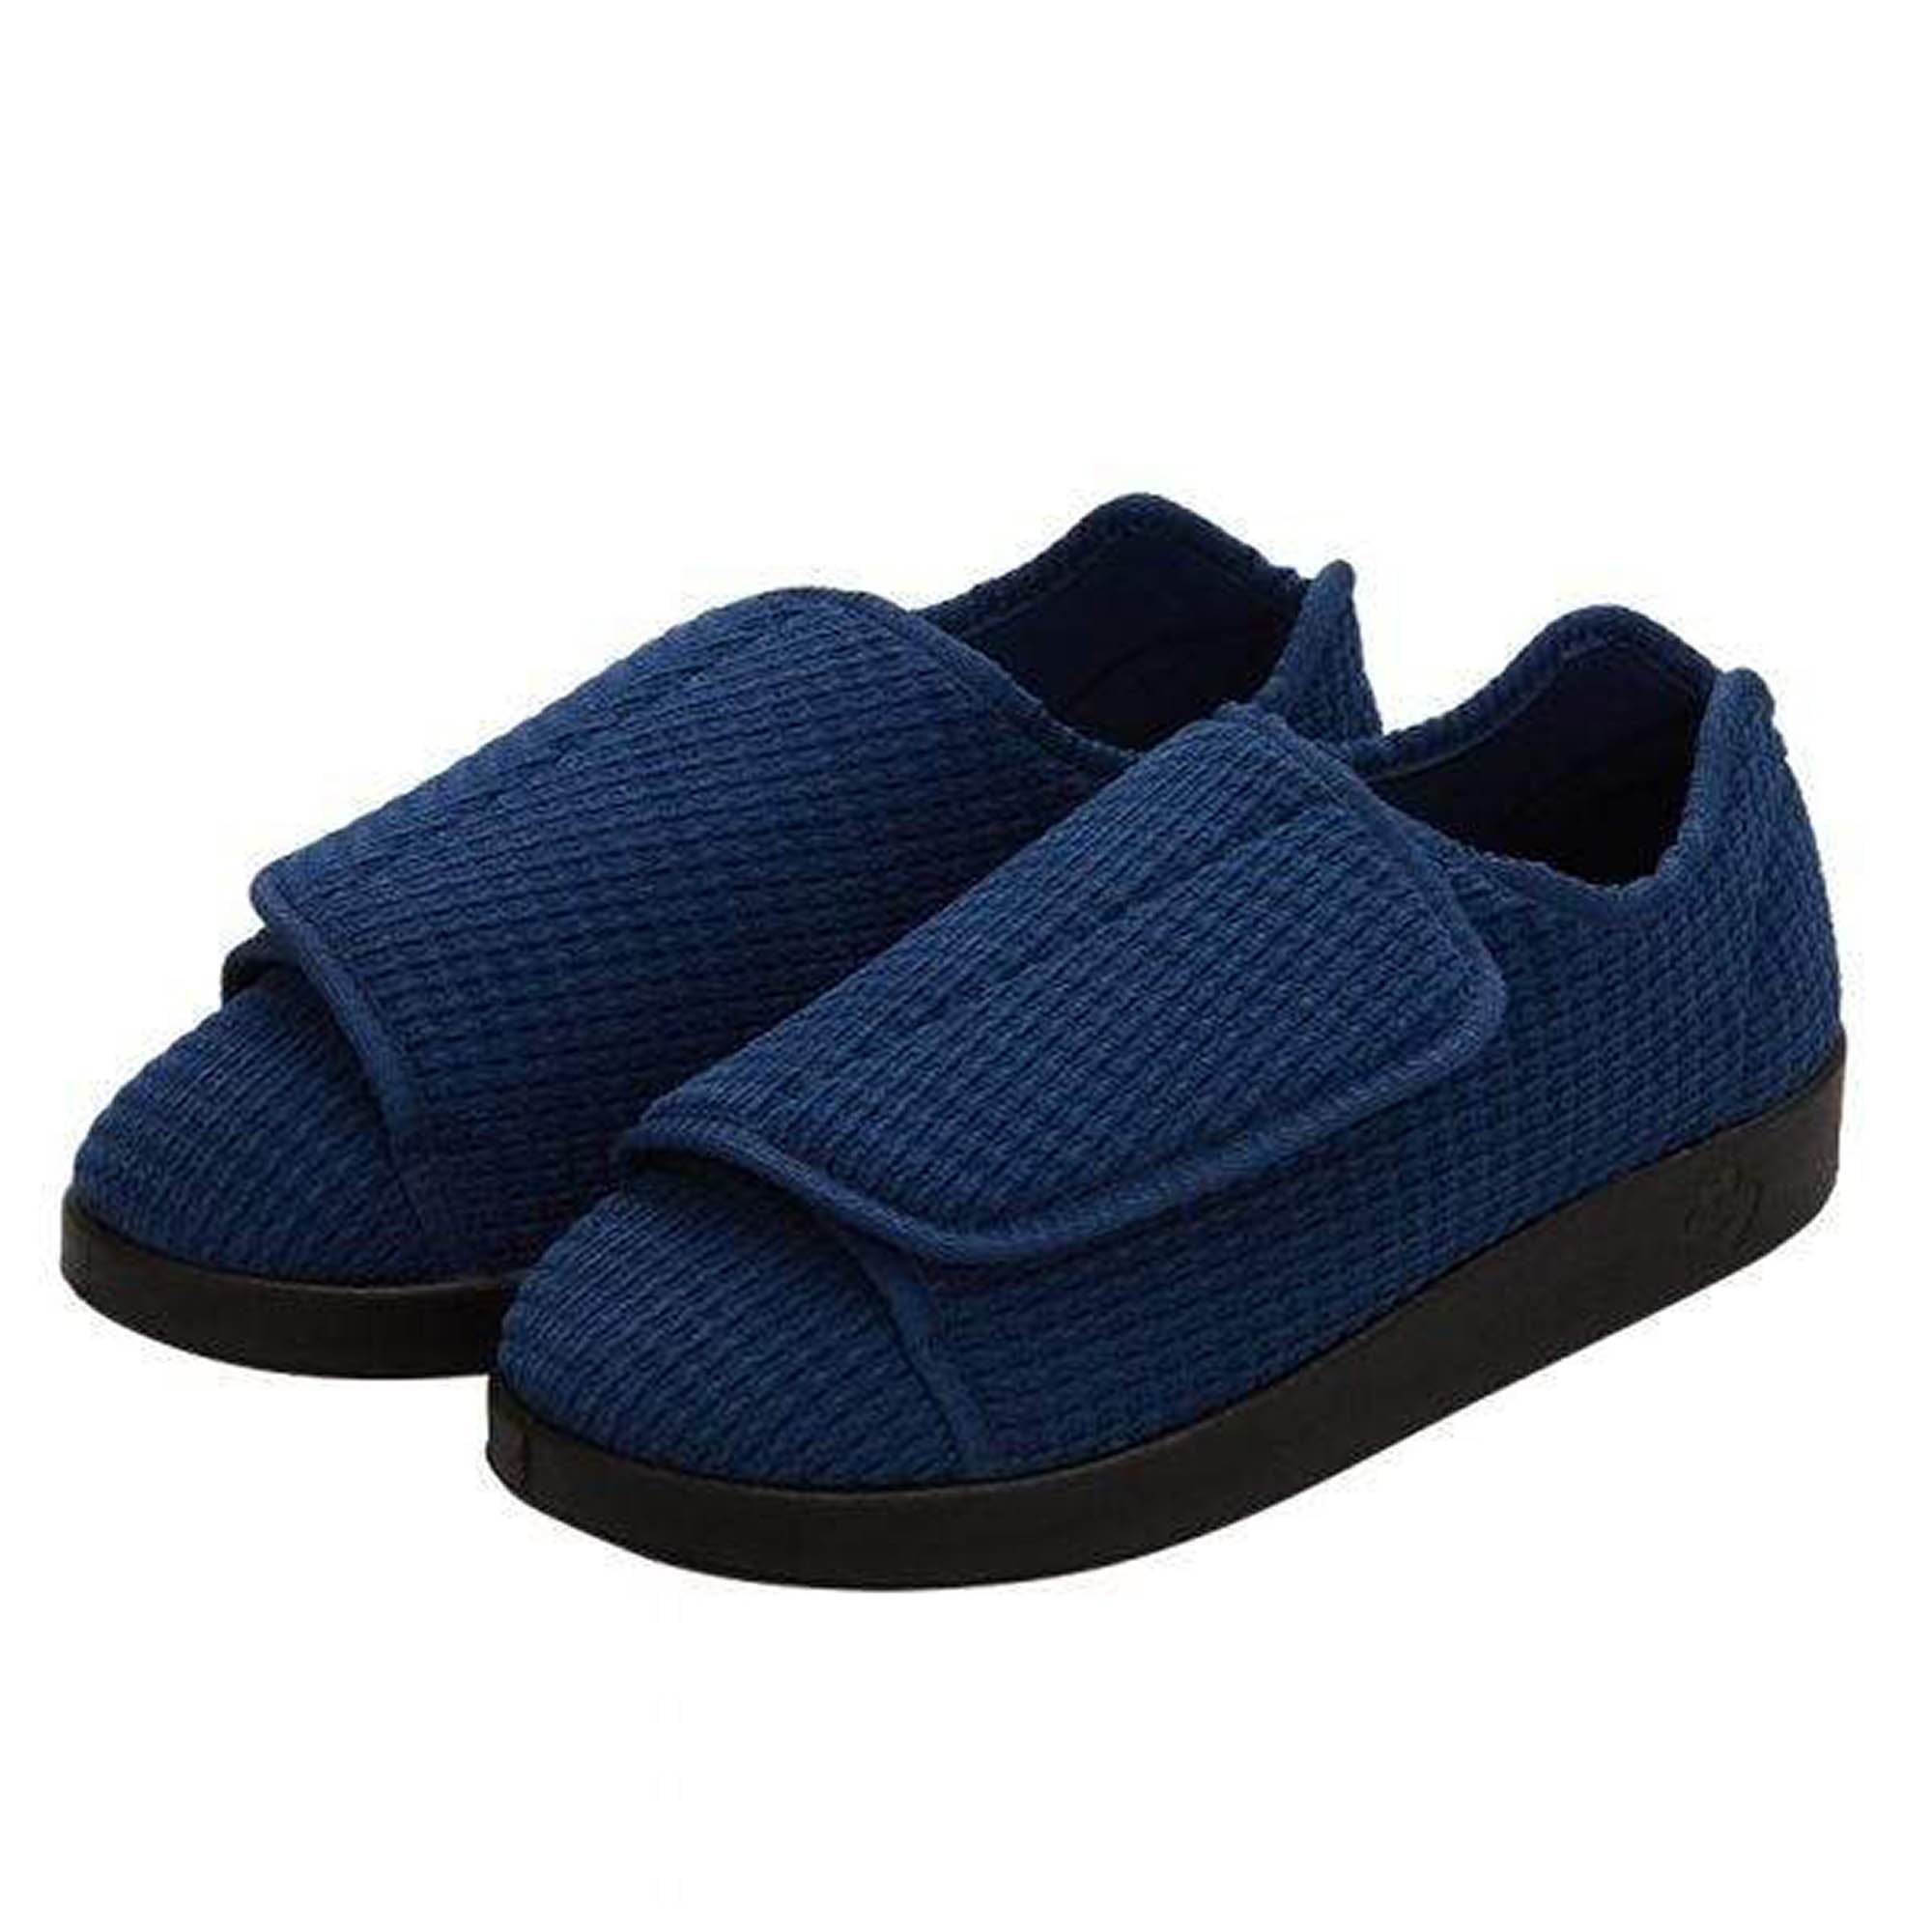 Silverts Men's Extra Extra Wide Slip-Resistant Slippers - Black - 10